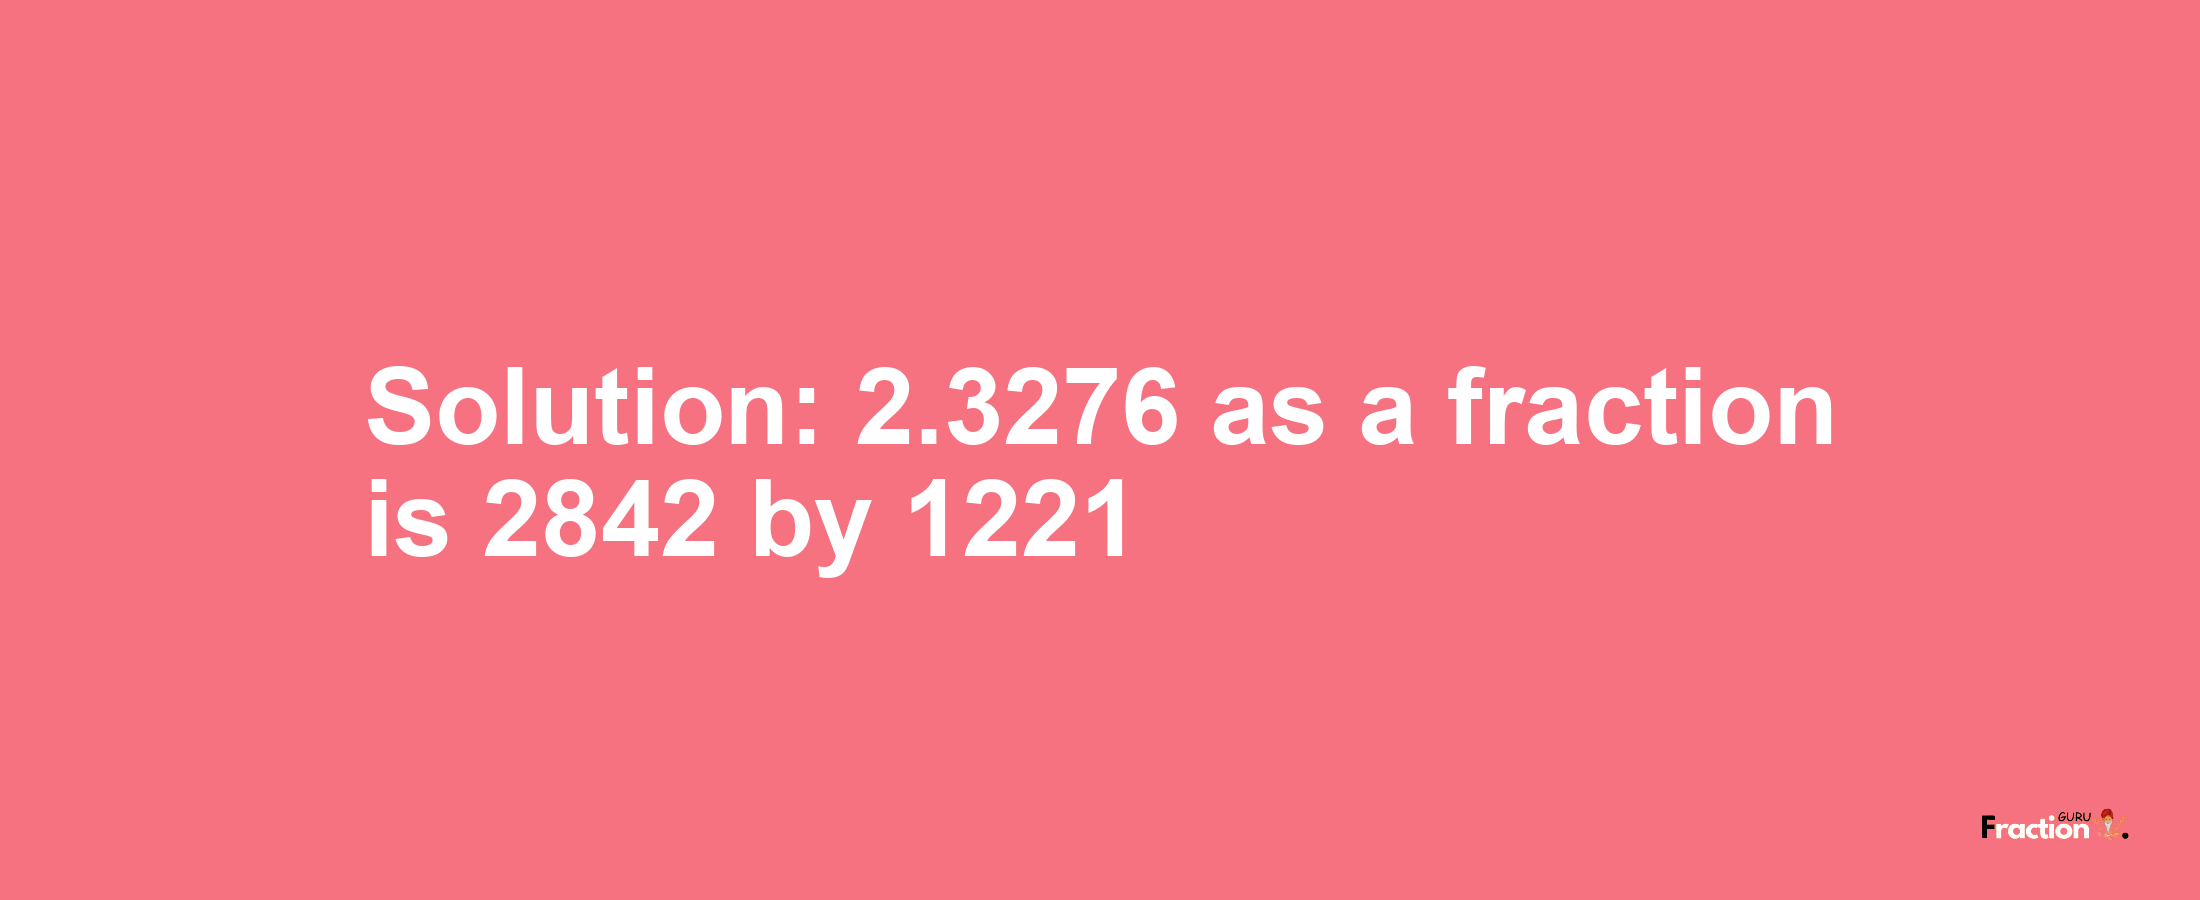 Solution:2.3276 as a fraction is 2842/1221